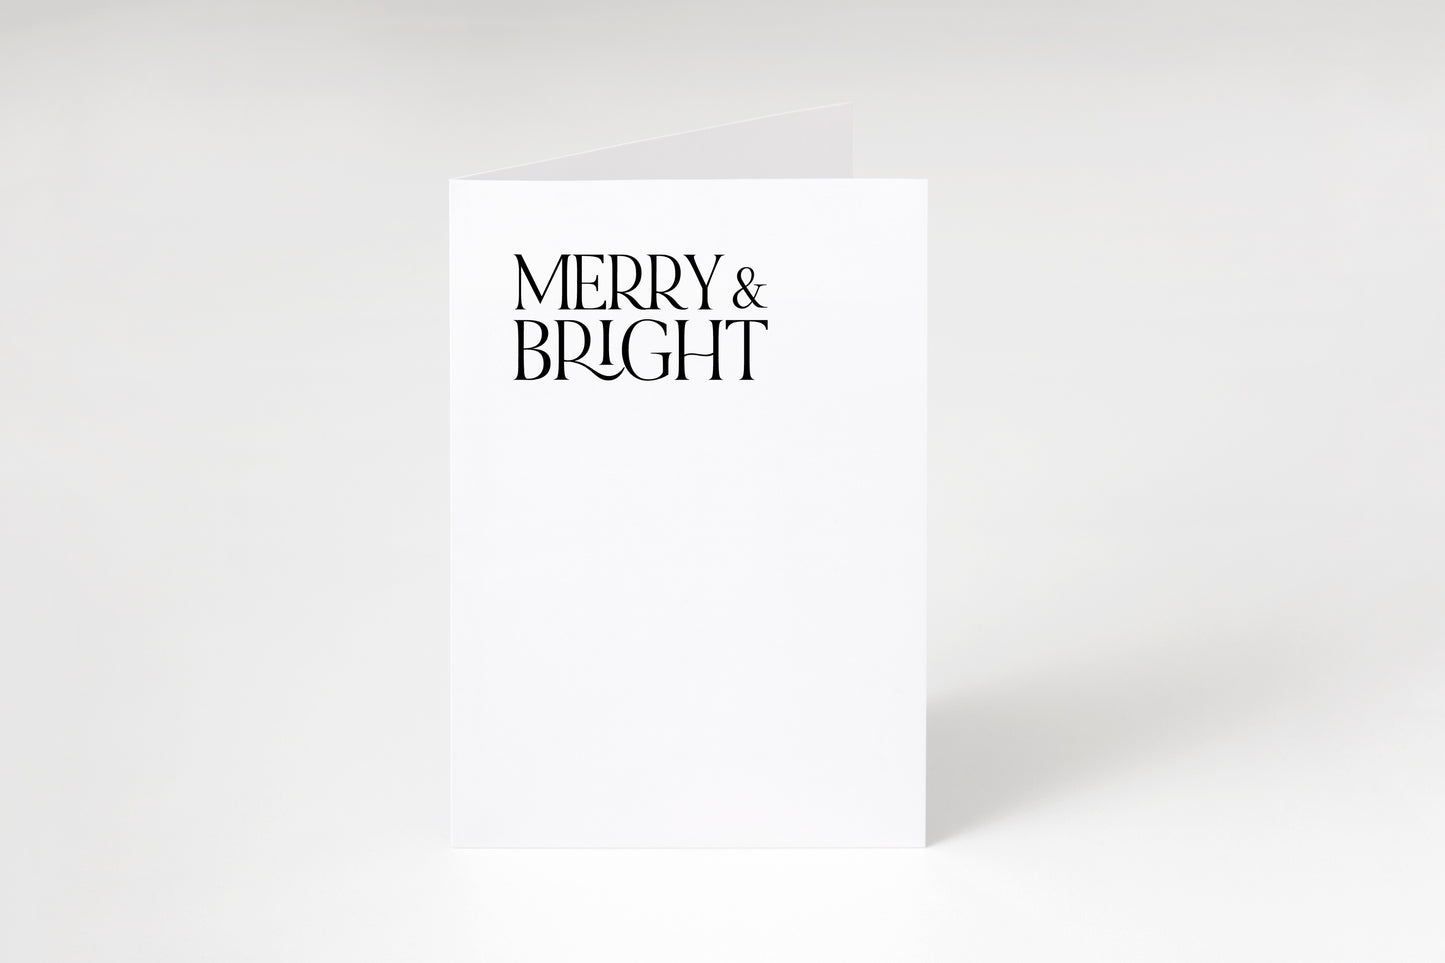 Merry and bright cards, Merry and bright Christmas cards, Christmas pack of cards, Christmas stationery set, Christmas greeting card,Holiday